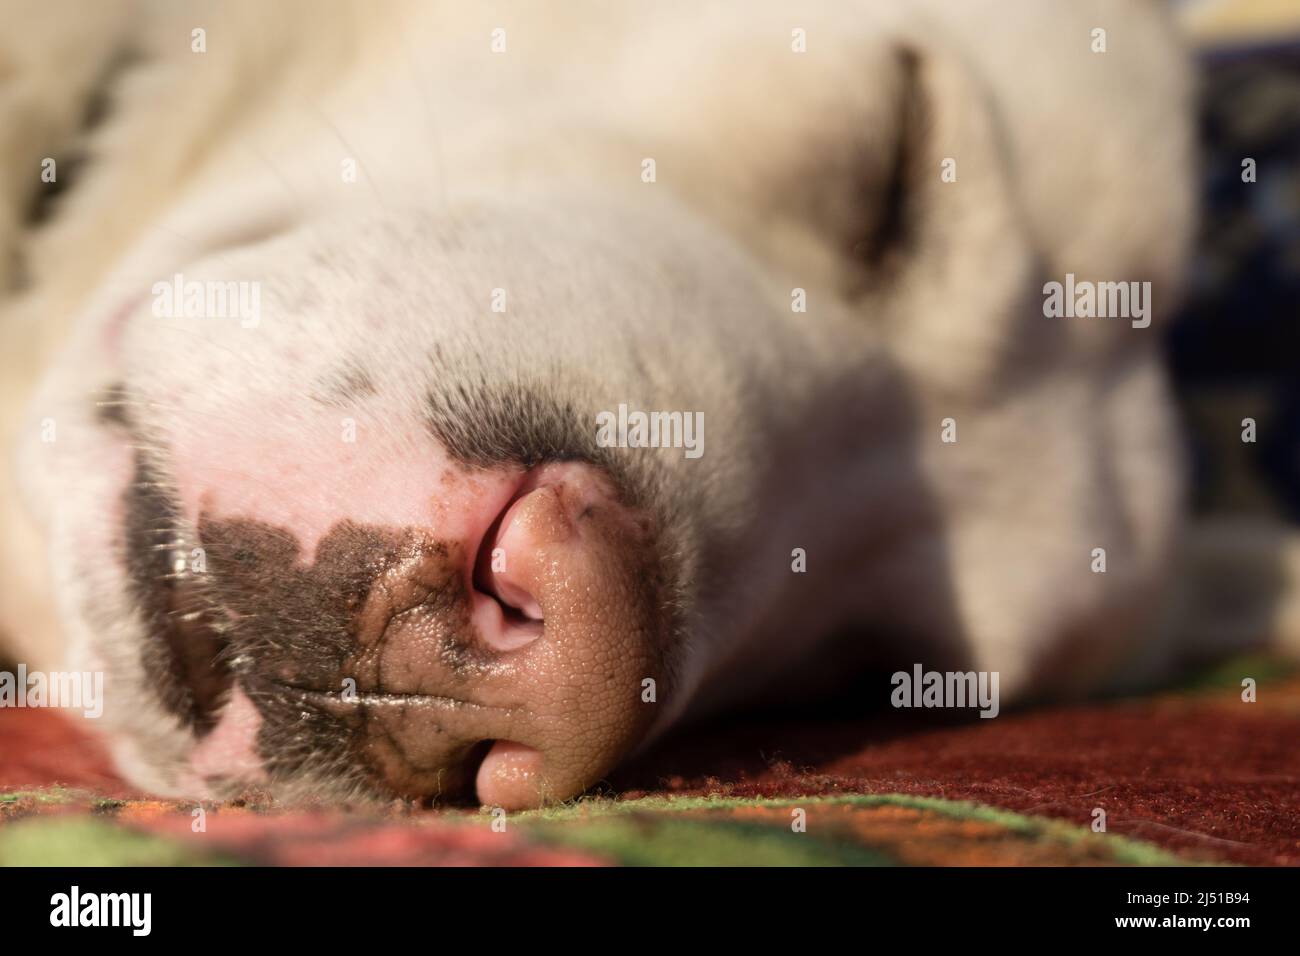 A close up shot of nose of a sleeping white dog with eyes closed. Stock Photo